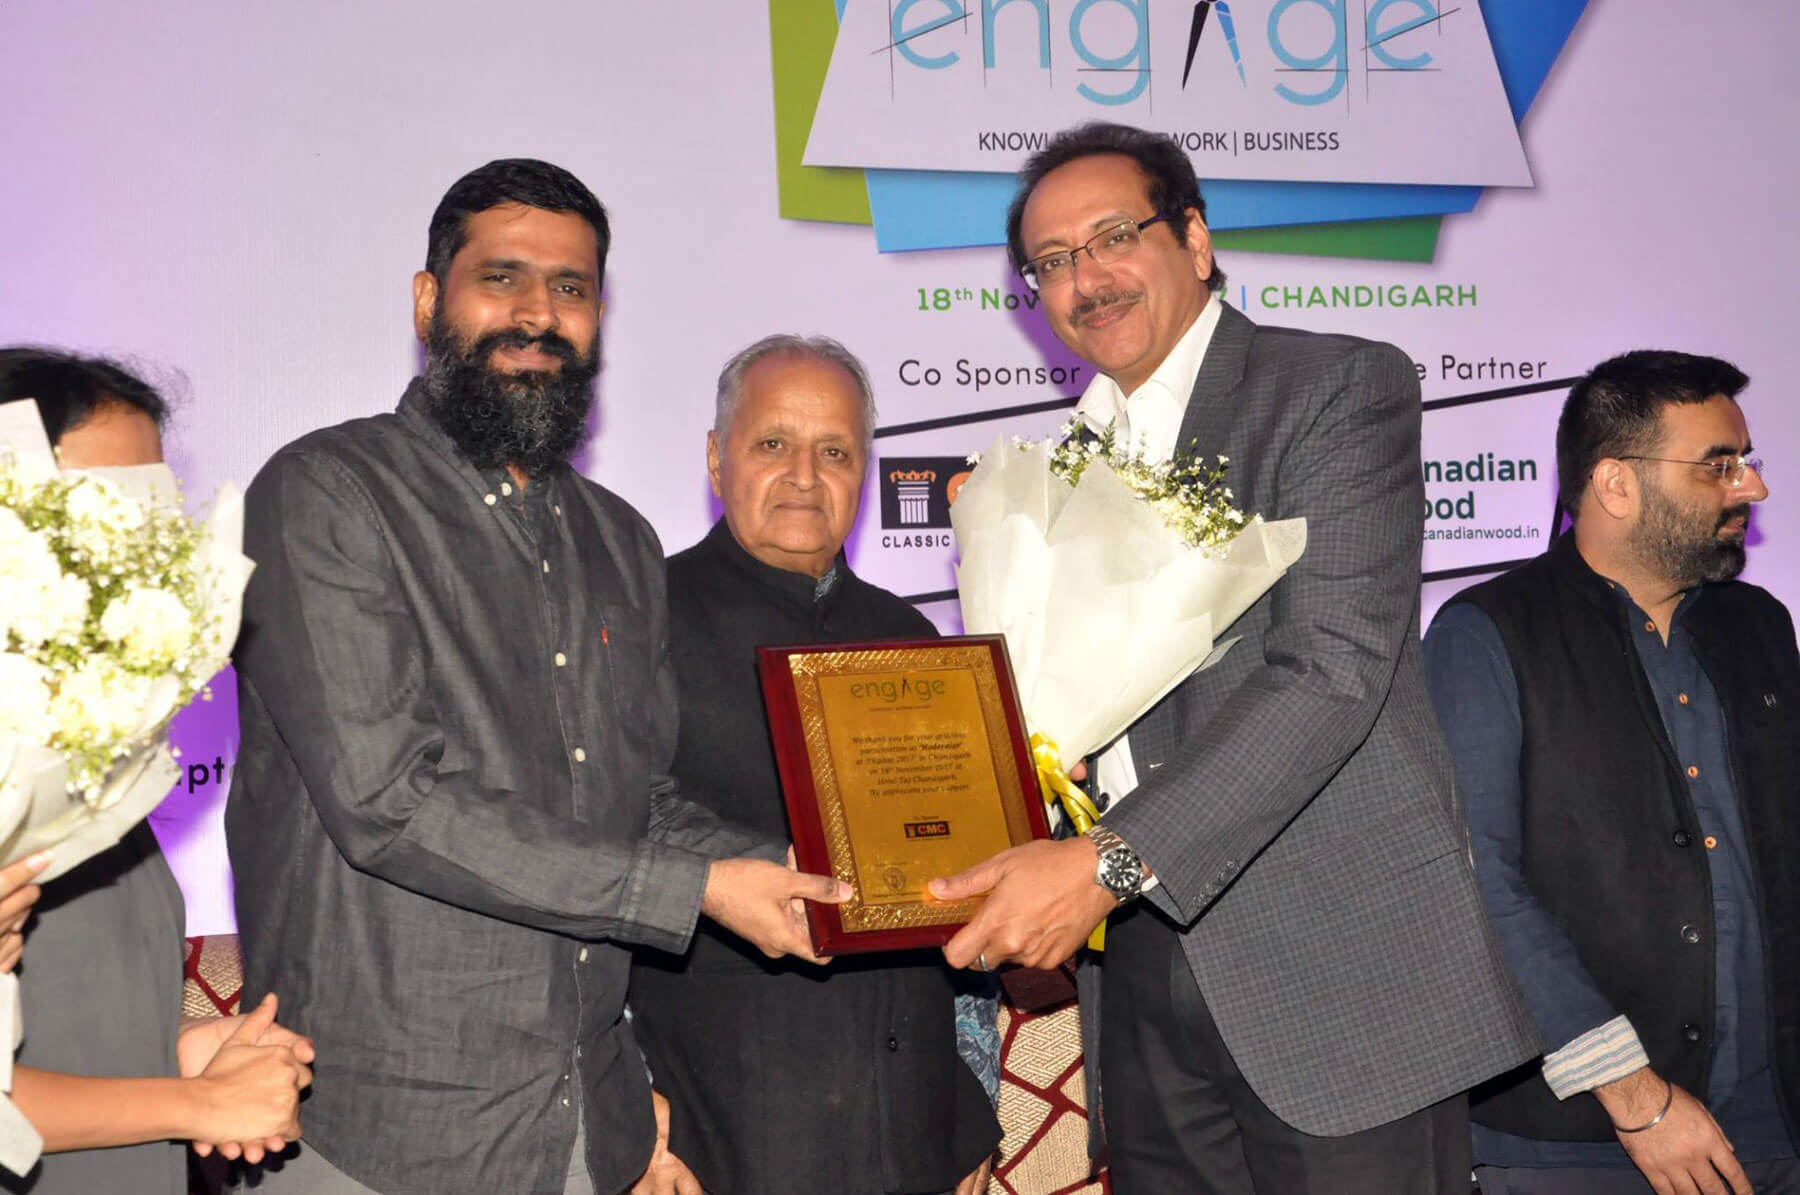 ar-lijo-jos-and-ar-reny-lijo-present-as-keynote-speakers-at-engage-iia-chandigarh-and-punjab-chapter-5